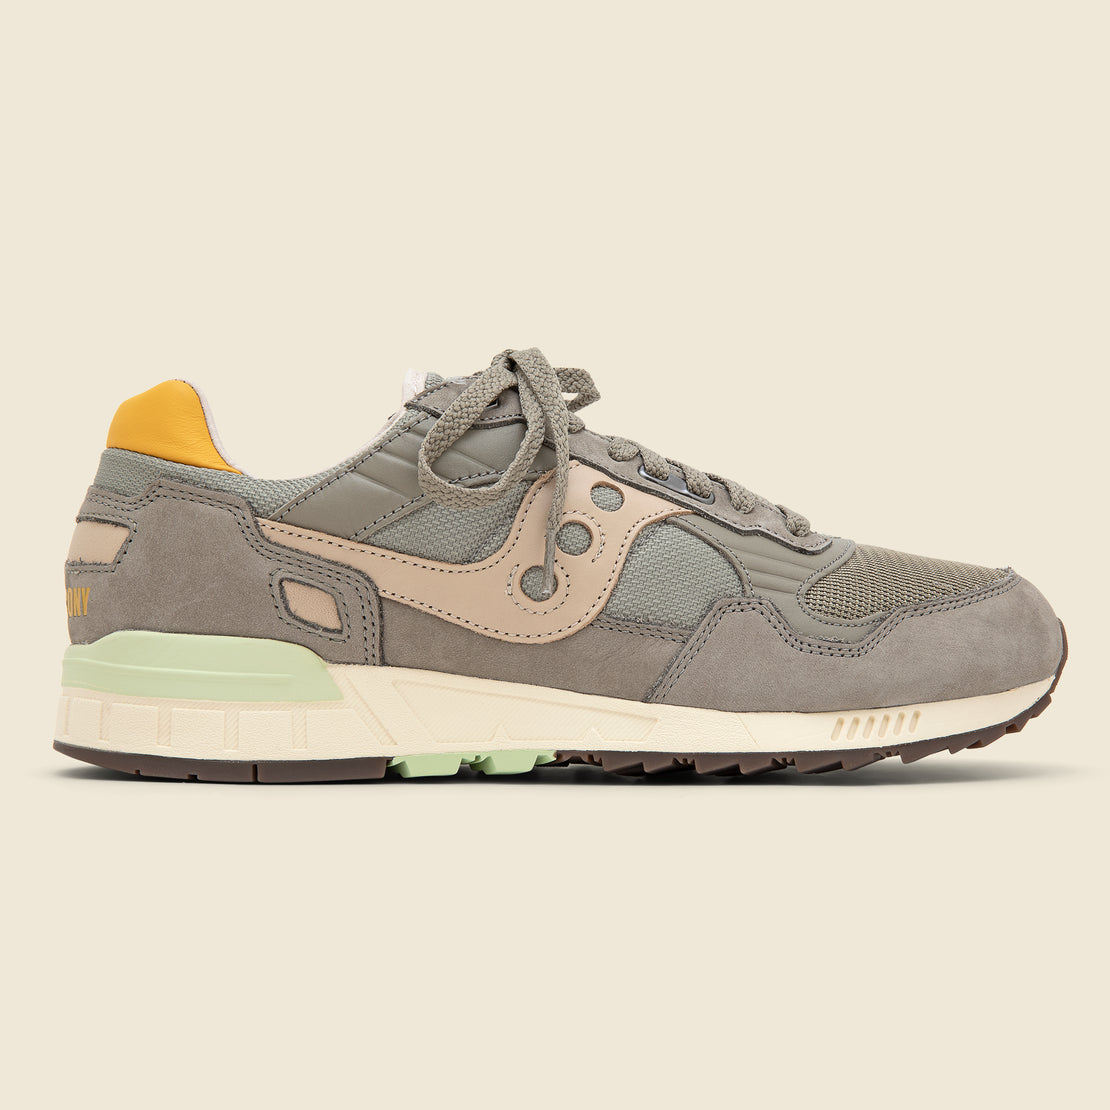 Saucony Shadow 5000 Sneaker - Grey/Taupe